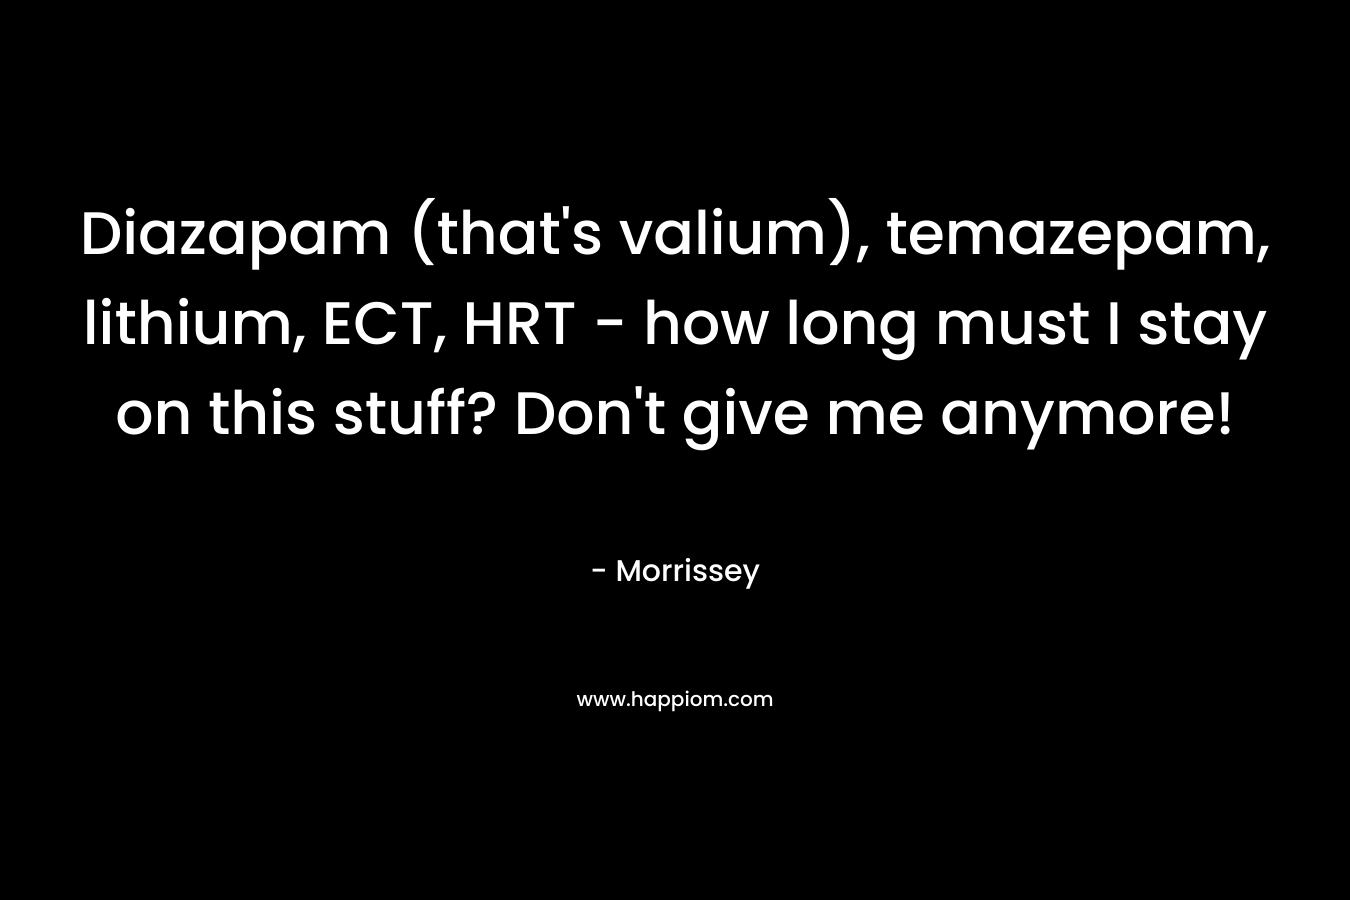 Diazapam (that’s valium), temazepam, lithium, ECT, HRT – how long must I stay on this stuff? Don’t give me anymore! – Morrissey